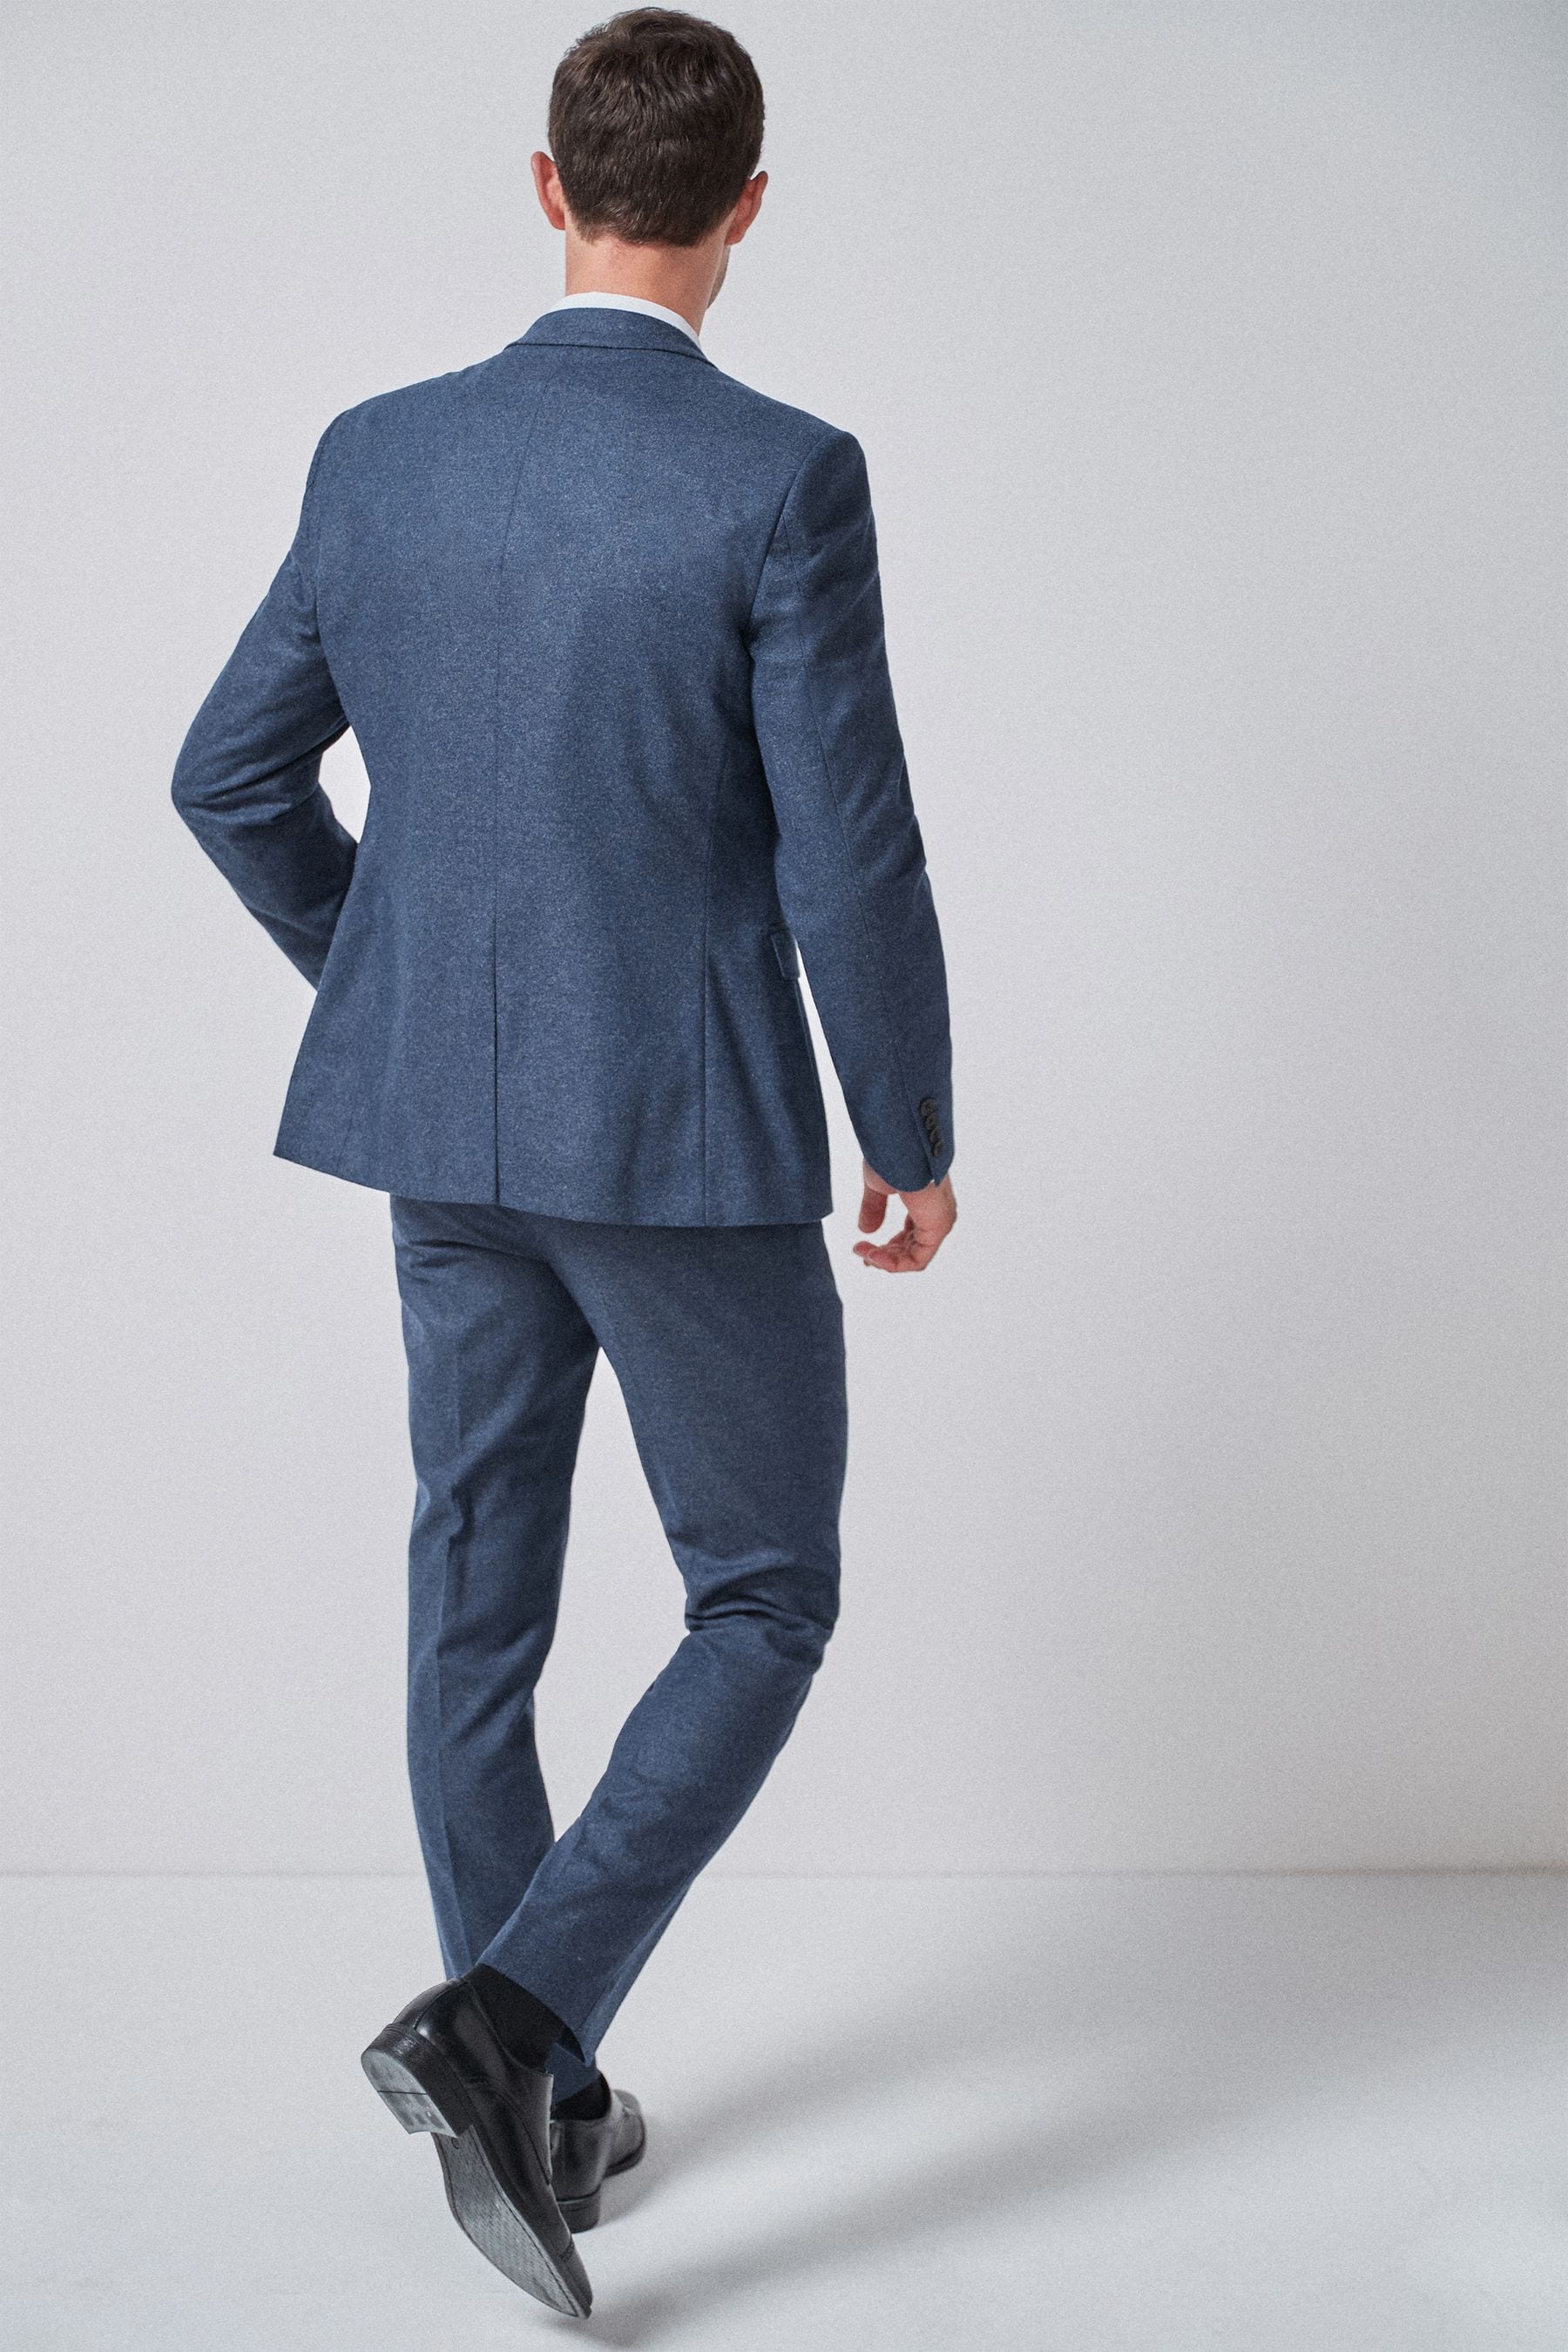 Buy Blue Wool Donegal Suit: Jacket from the Next UK online shop